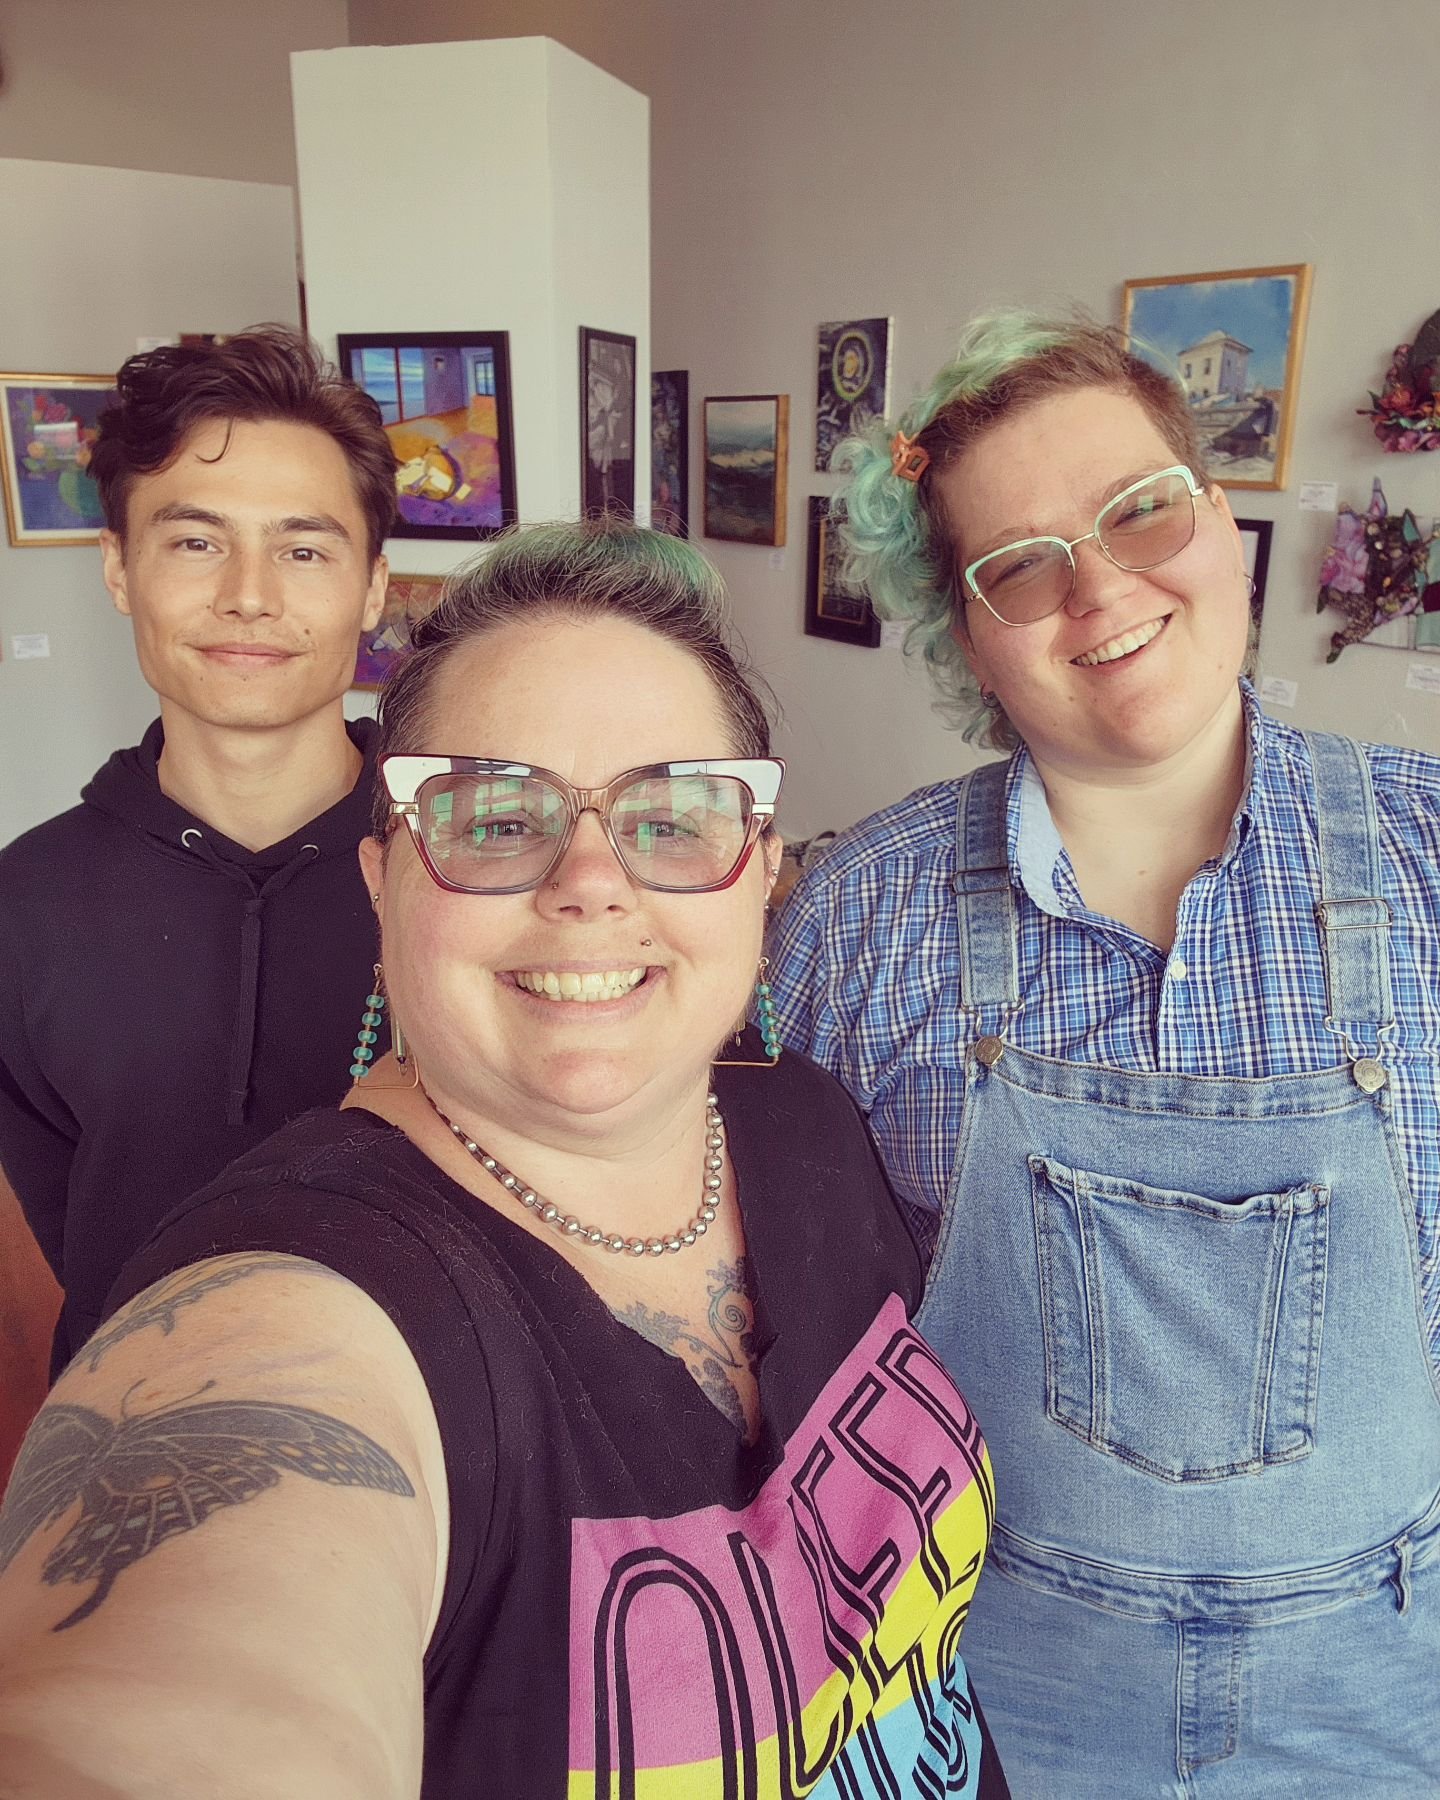 More pre-opening thanks to Noah and Katie, staff of the Ink People's Brenda Tuxford Gallery, who helped hang 85(!) wall tags today. Eighty-five! What a show. 

Tomorrow's Arts Alive reception from 6-9pm will be fantastic. Come out and see us, pick up